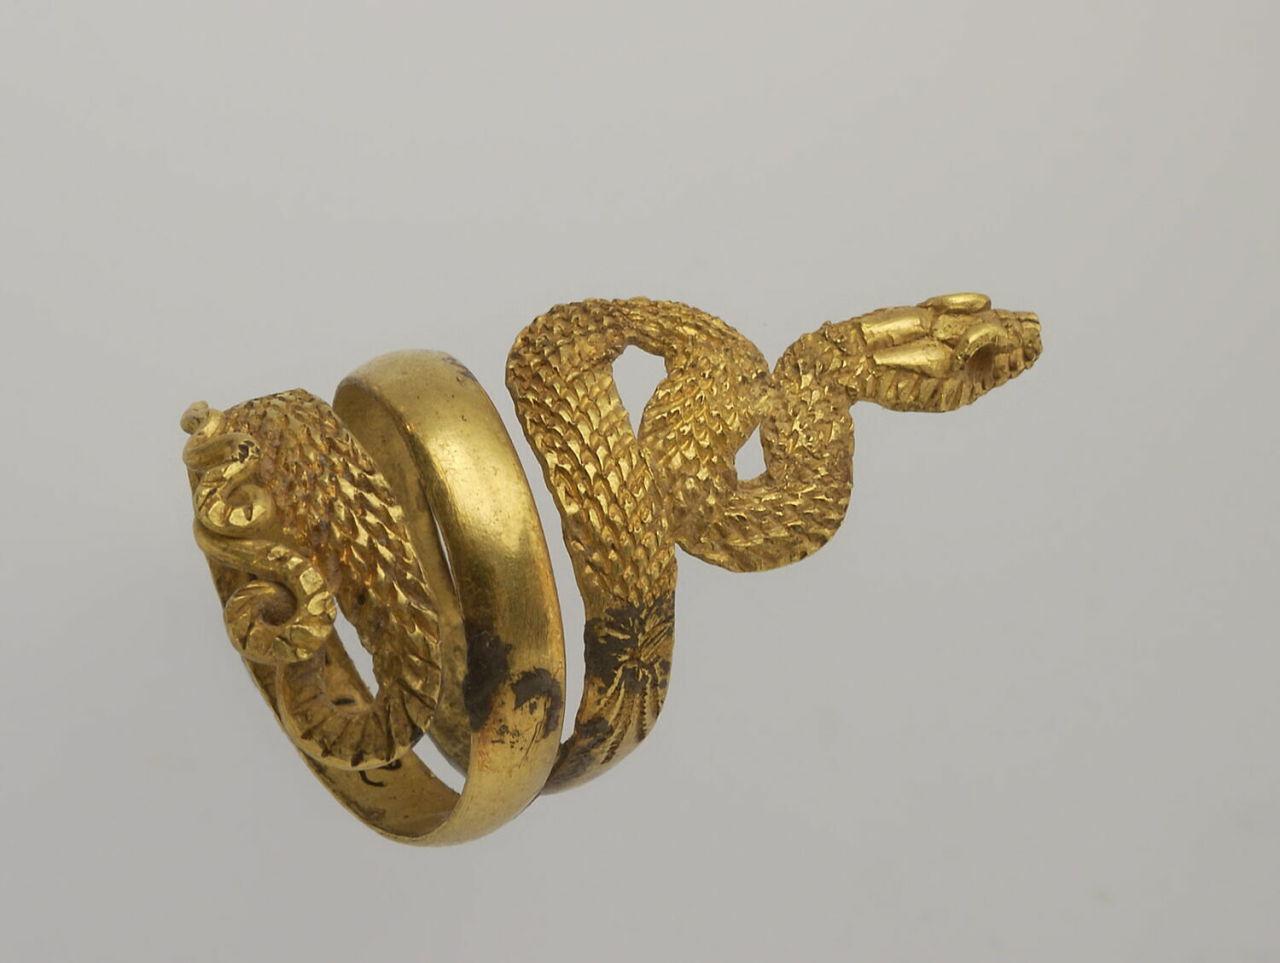 From The Louvre, Gold ring from Roman Egypt, 1st century AD.jpg